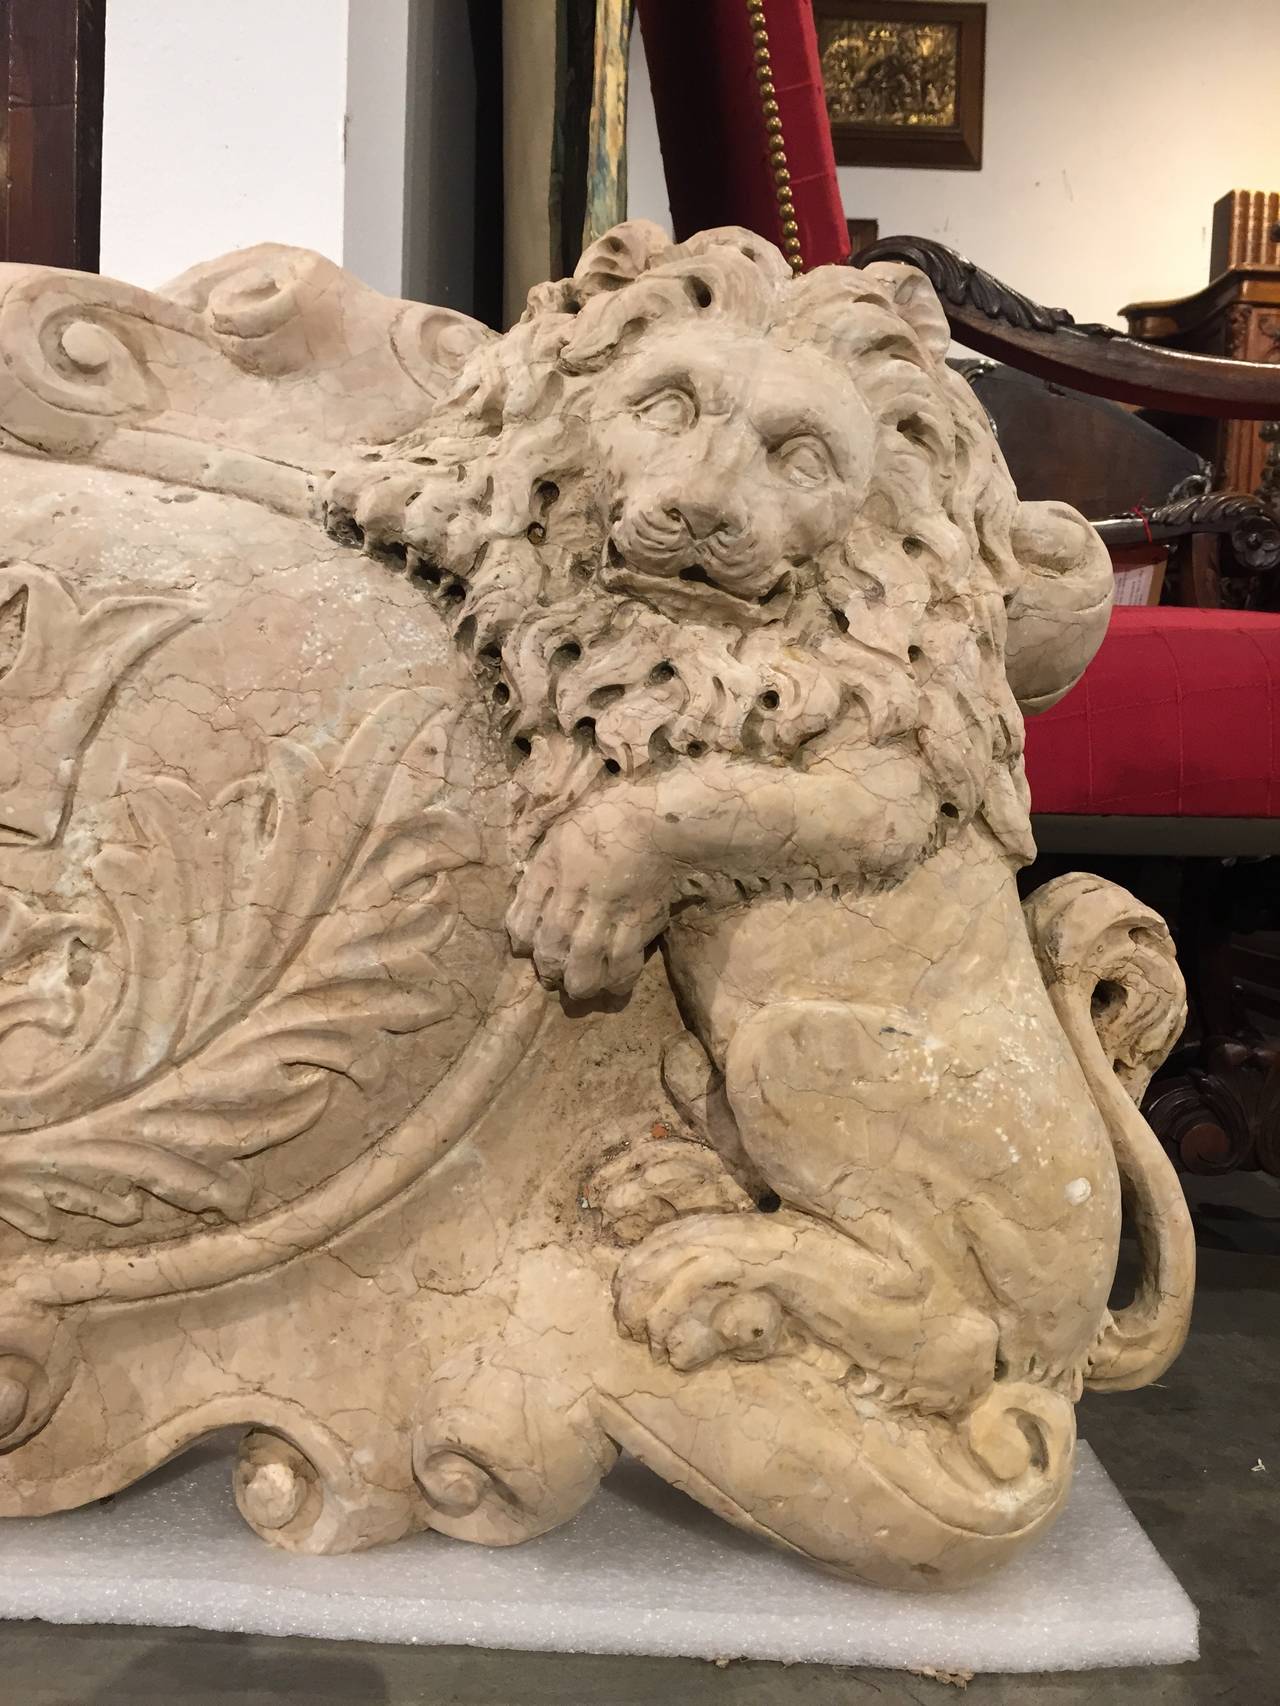 This stunning, large, thick, antique Italian marble cartouche has two lion supporters at either end of the raised oval area. It was carved in the 1700s and is from Venice, Italy. The intricately carved details of their manes, arms, paws and claws